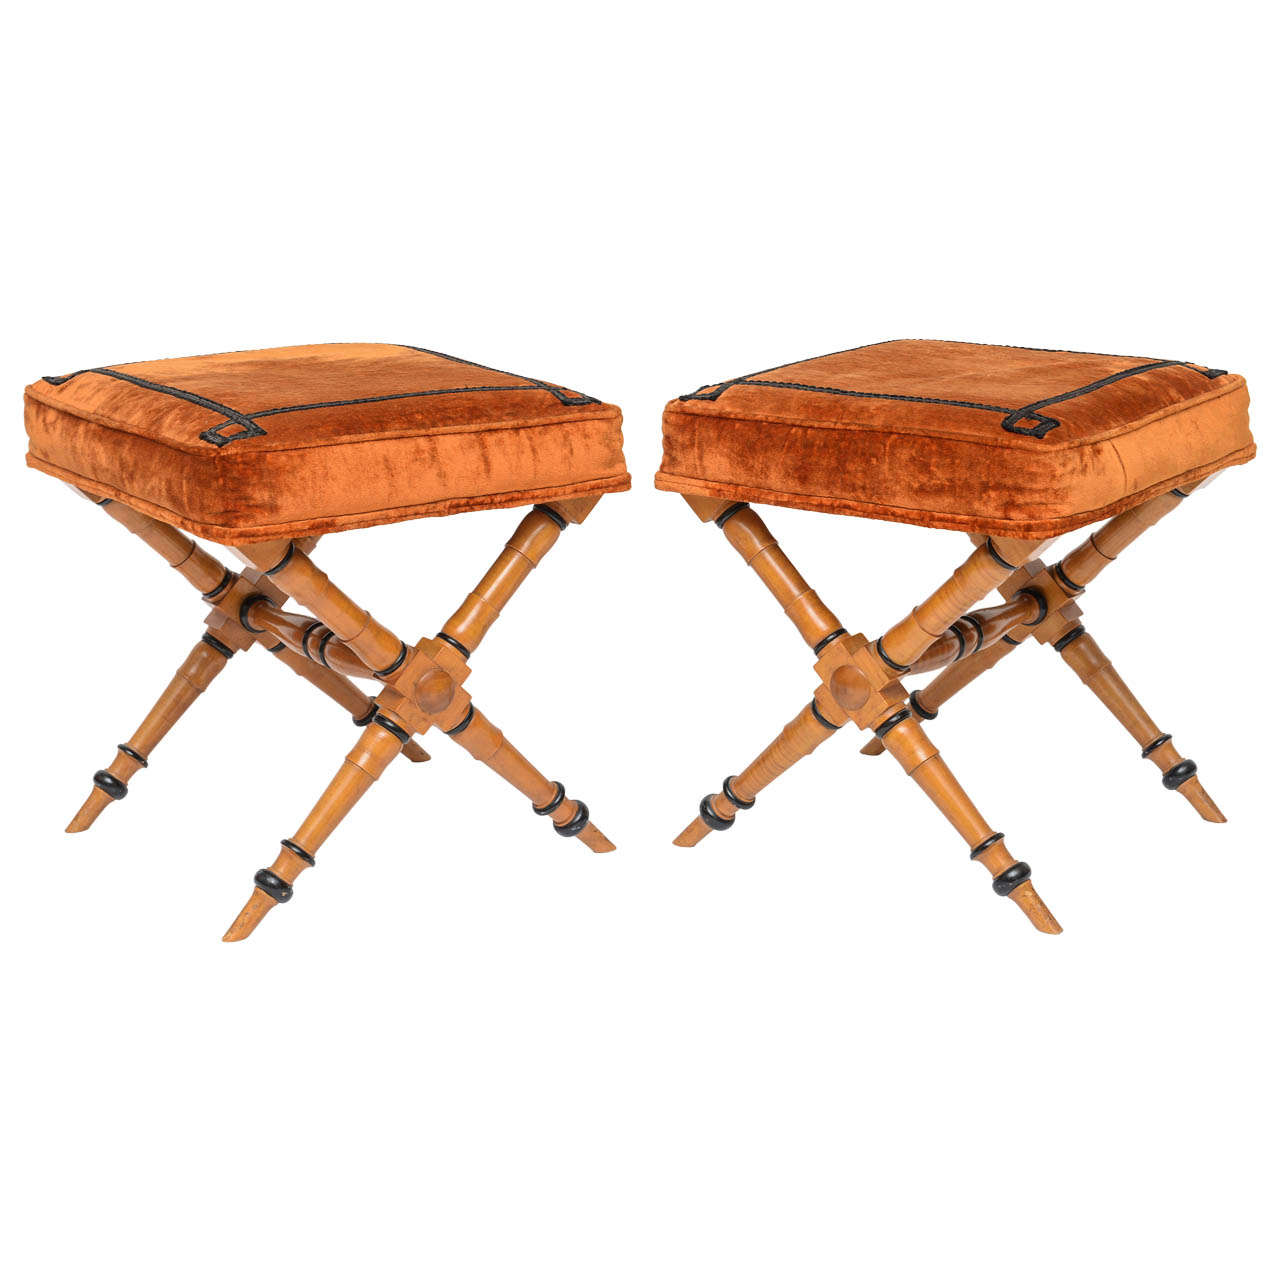 Pair of Fruitwood X Benches- Biedermeier Style